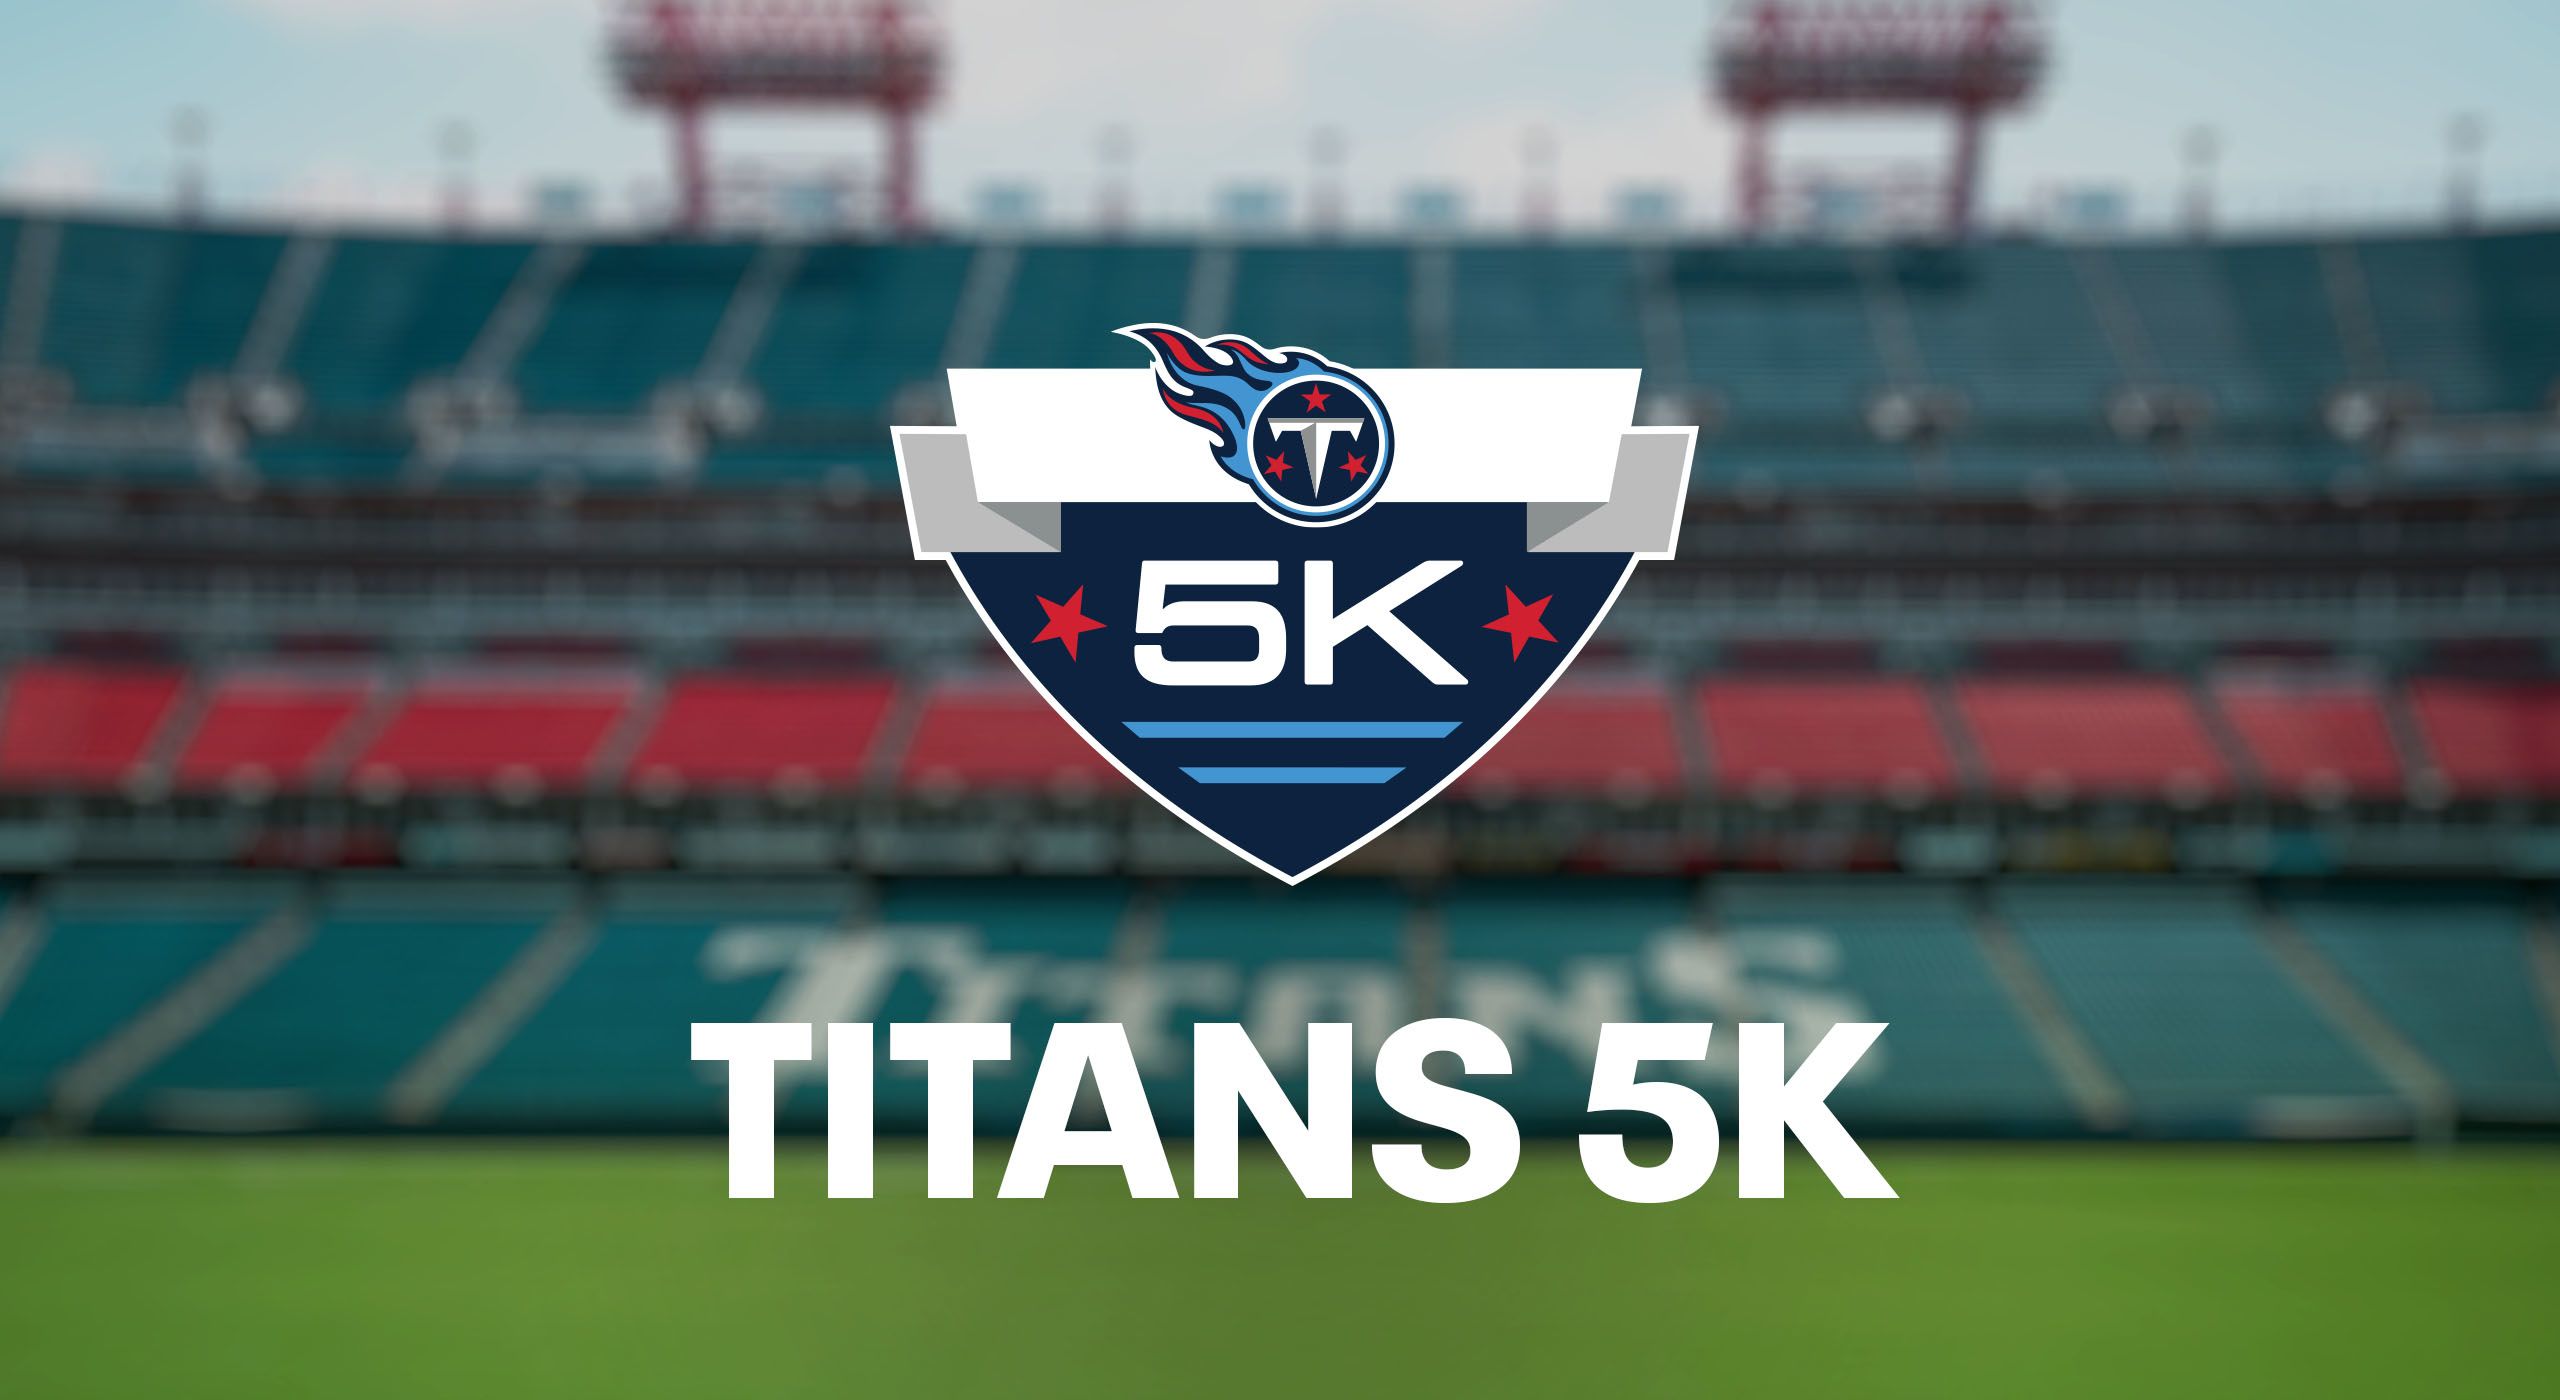 Tennessee Titans Announce 11th Annual Titans Foundation 5K - The Sports  Credential